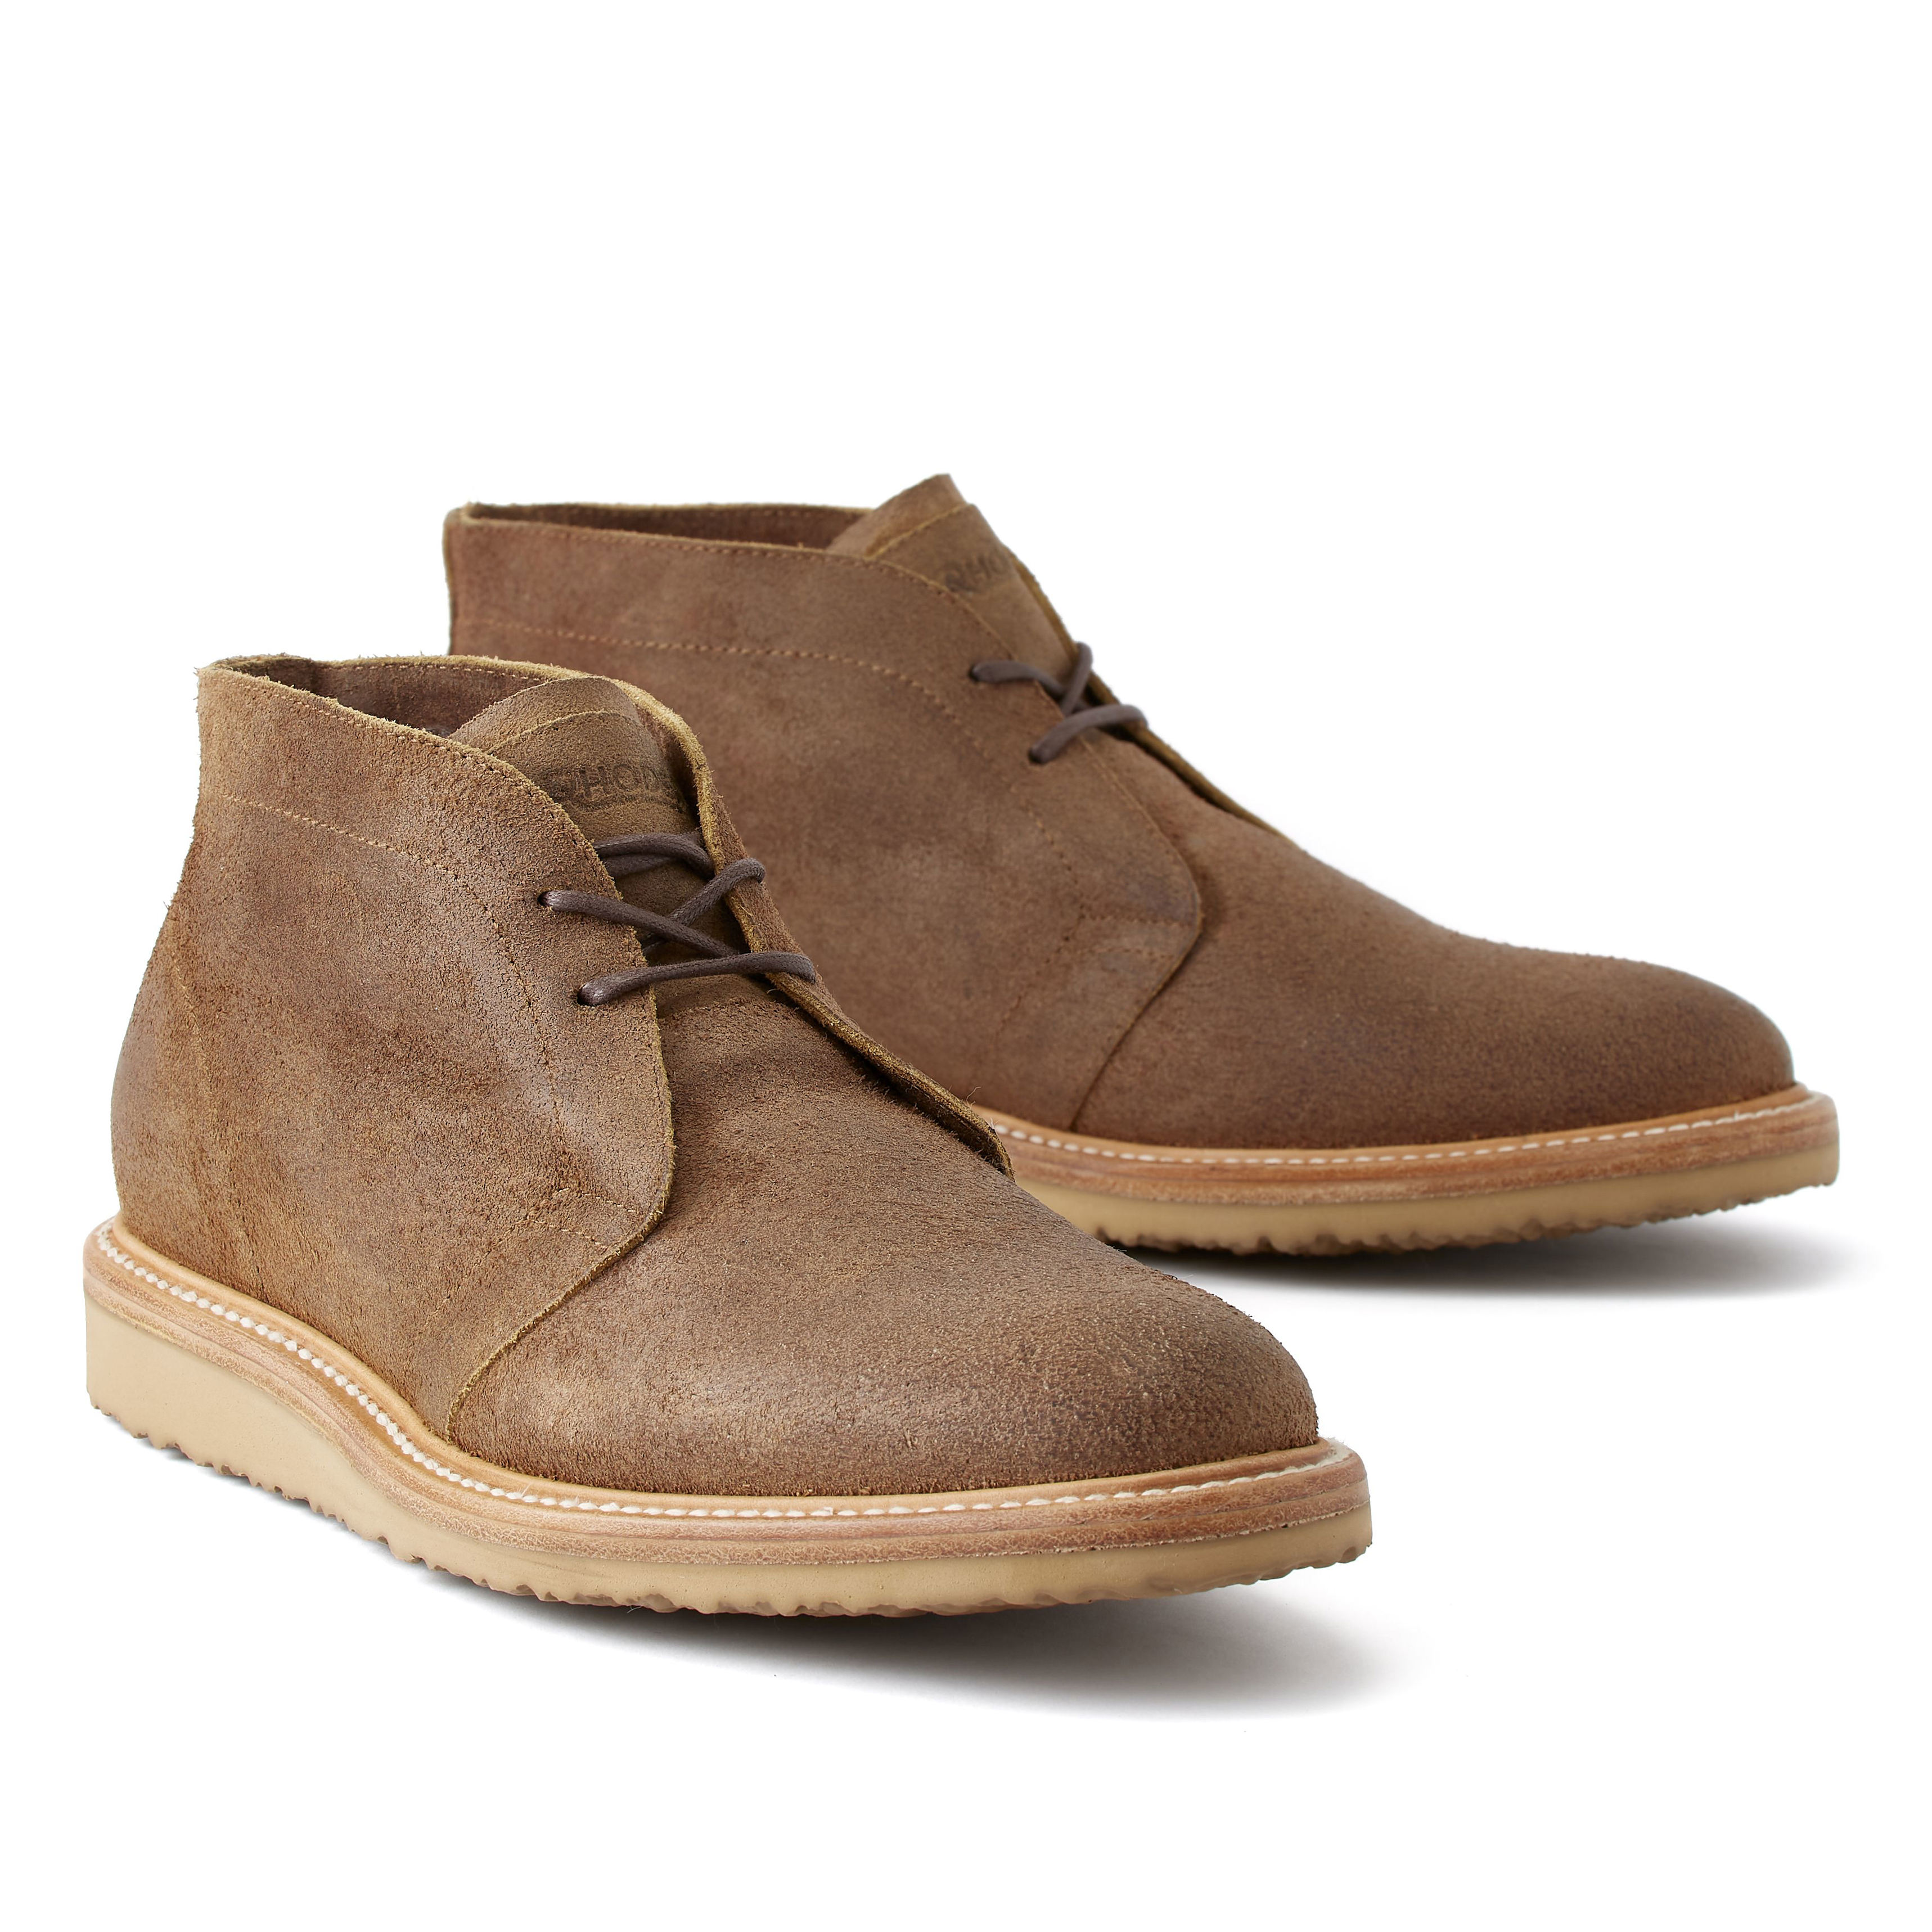 10 Desert Boots That Are Tough, Comfy, and Stylish